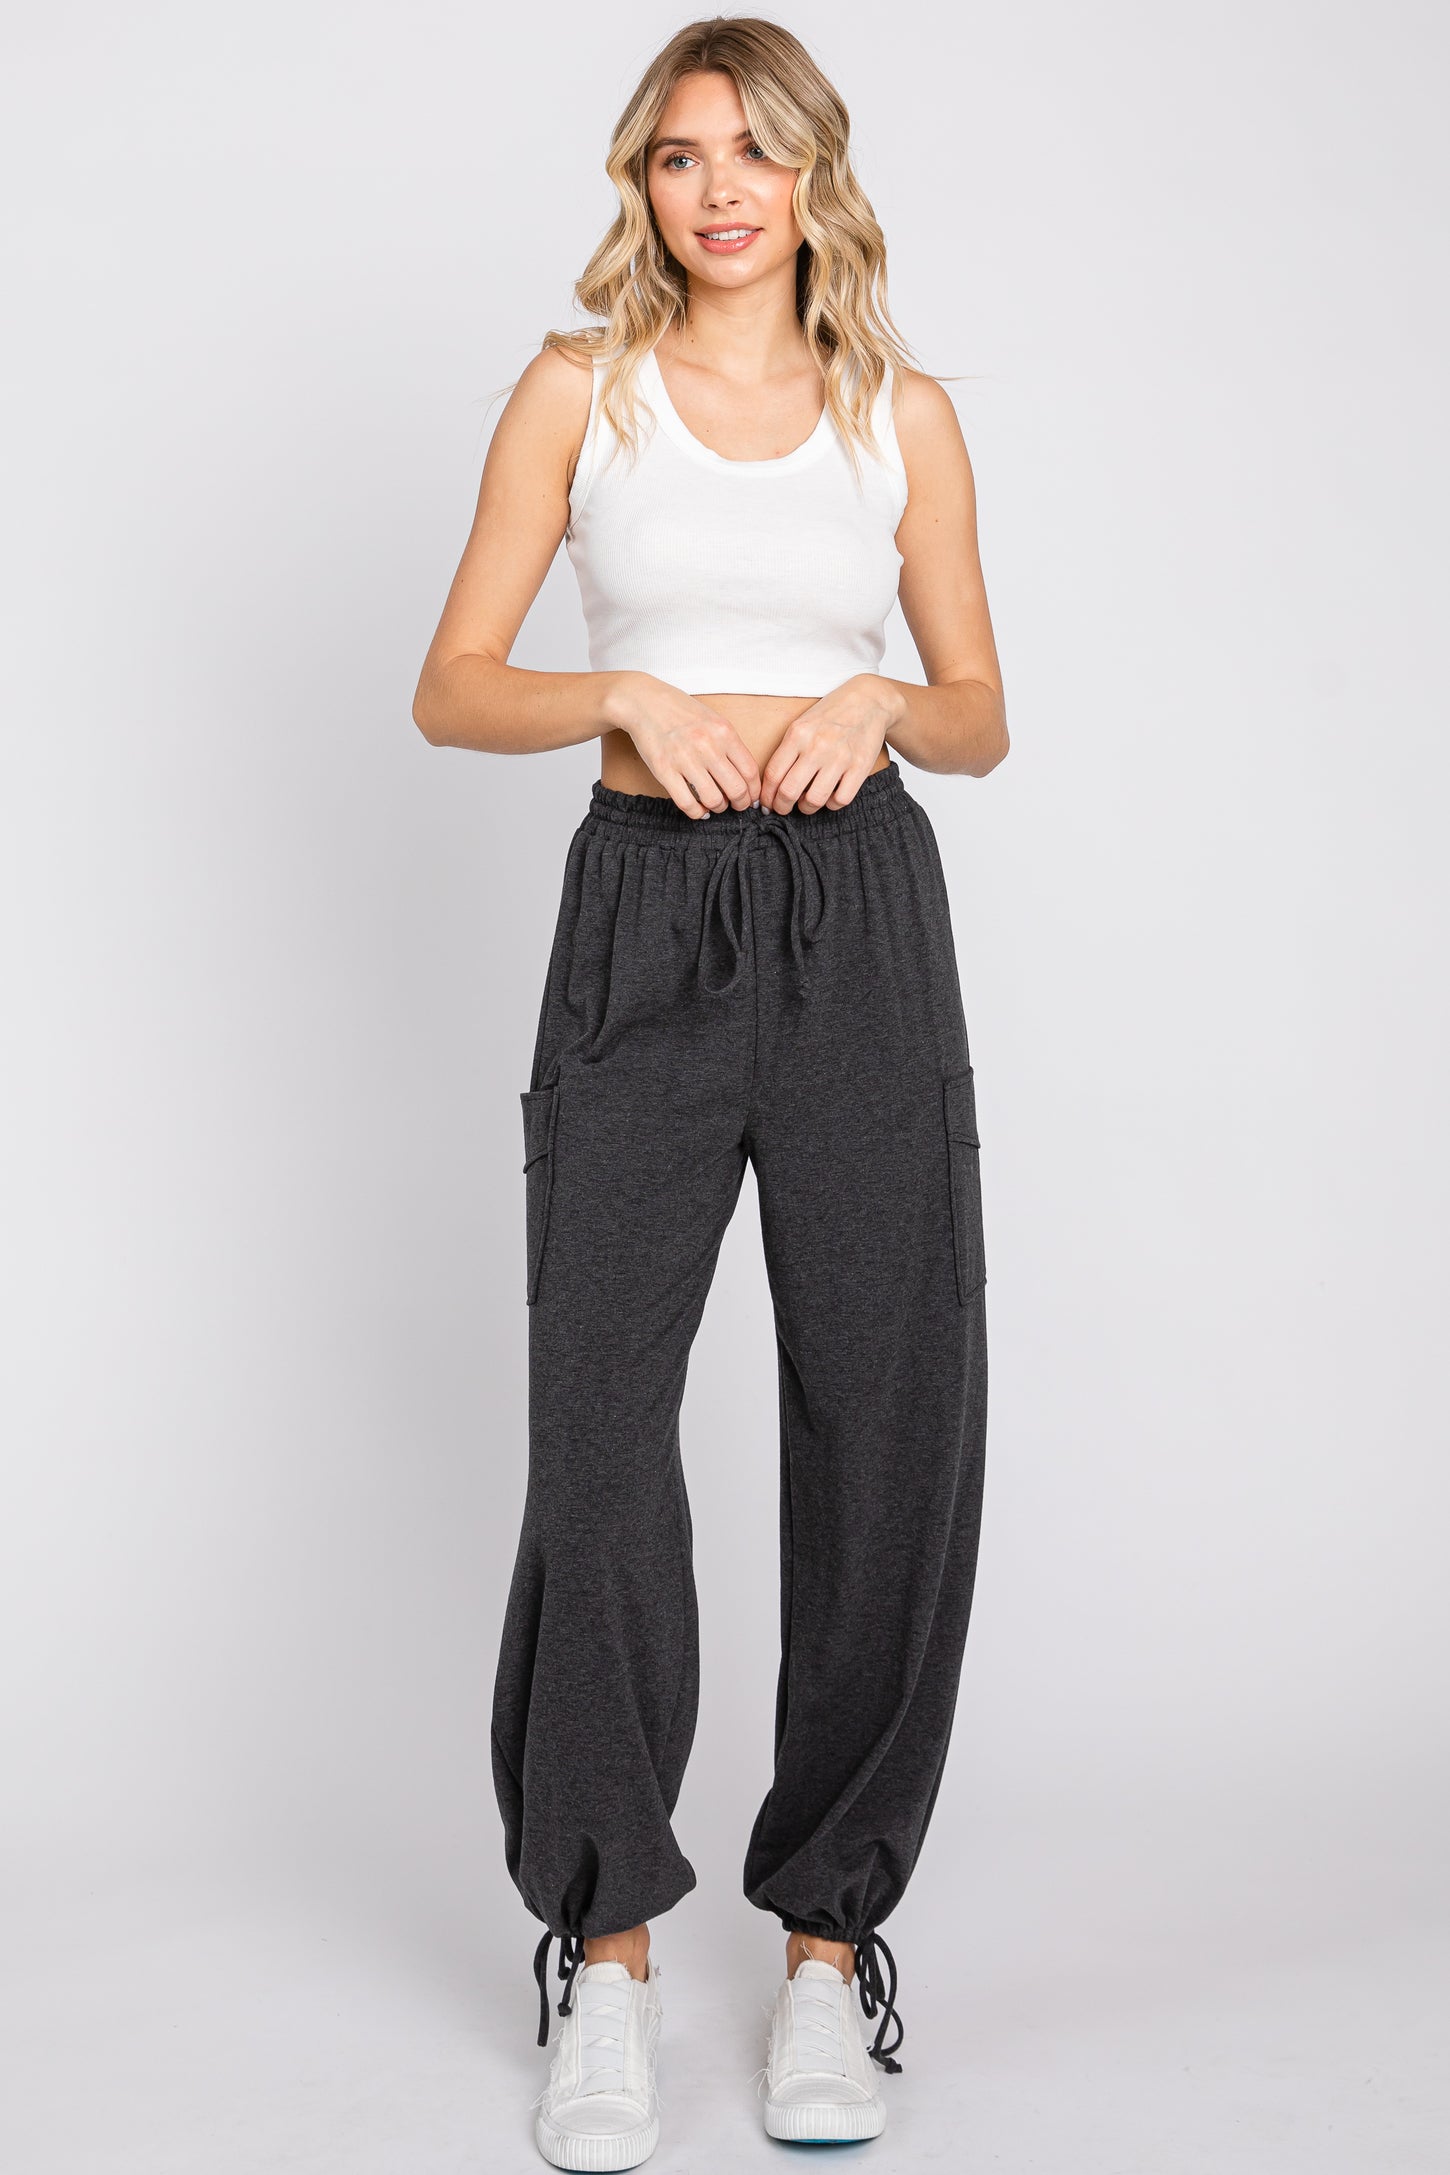 Charcoal Side Pocket Drawstring Ankle Tie Maternity Lounge Pants– PinkBlush